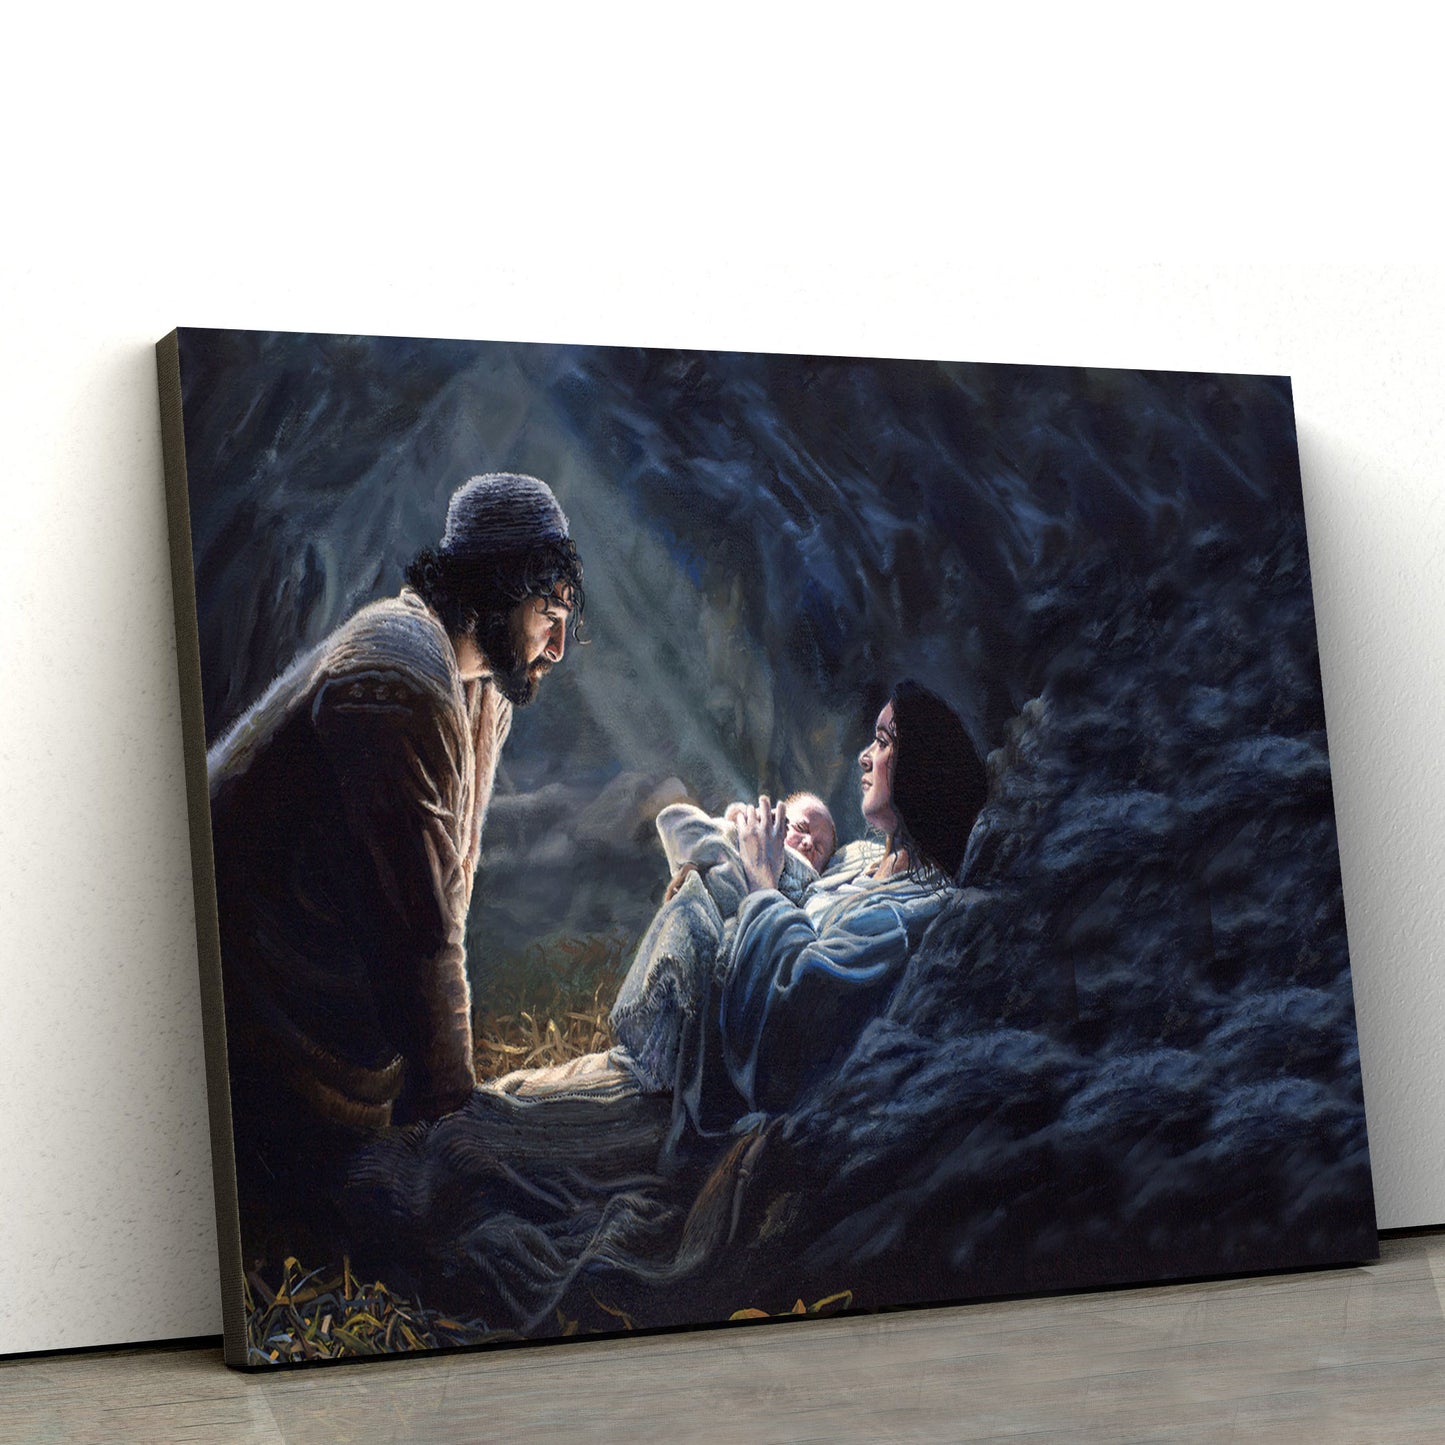 Joseph Kneeling At The Feet Of Mary And Newborn Baby Jesus Canvas Art - Jesus Christ Pictures - Jesus Wall Art - Christian Wall Decor